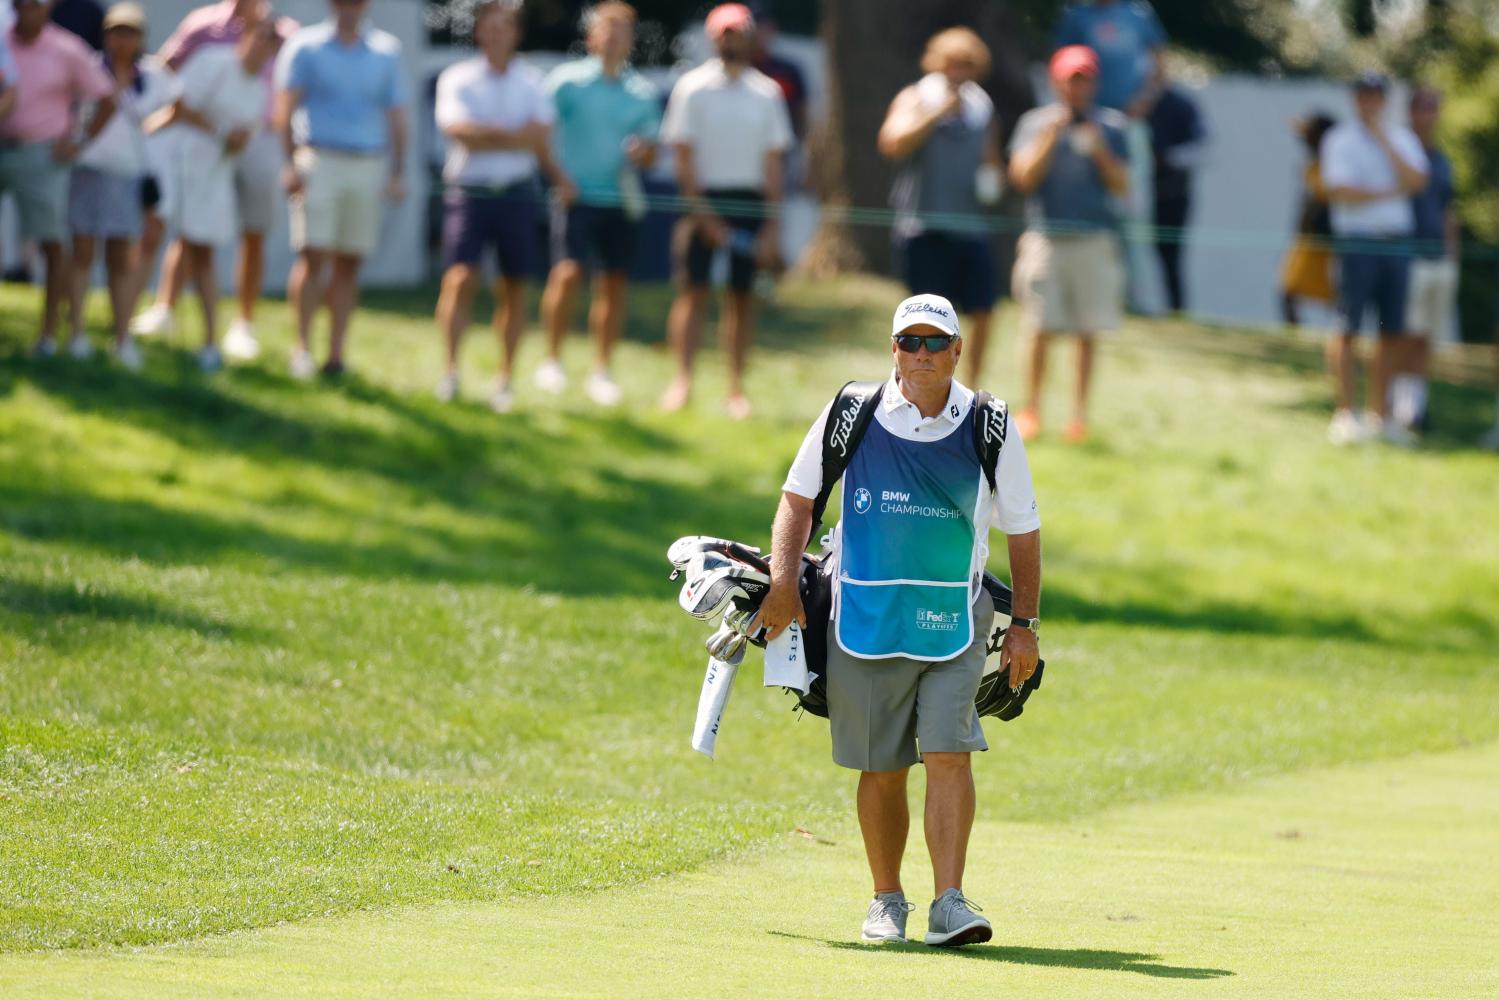 There's no denying the importance of caddies